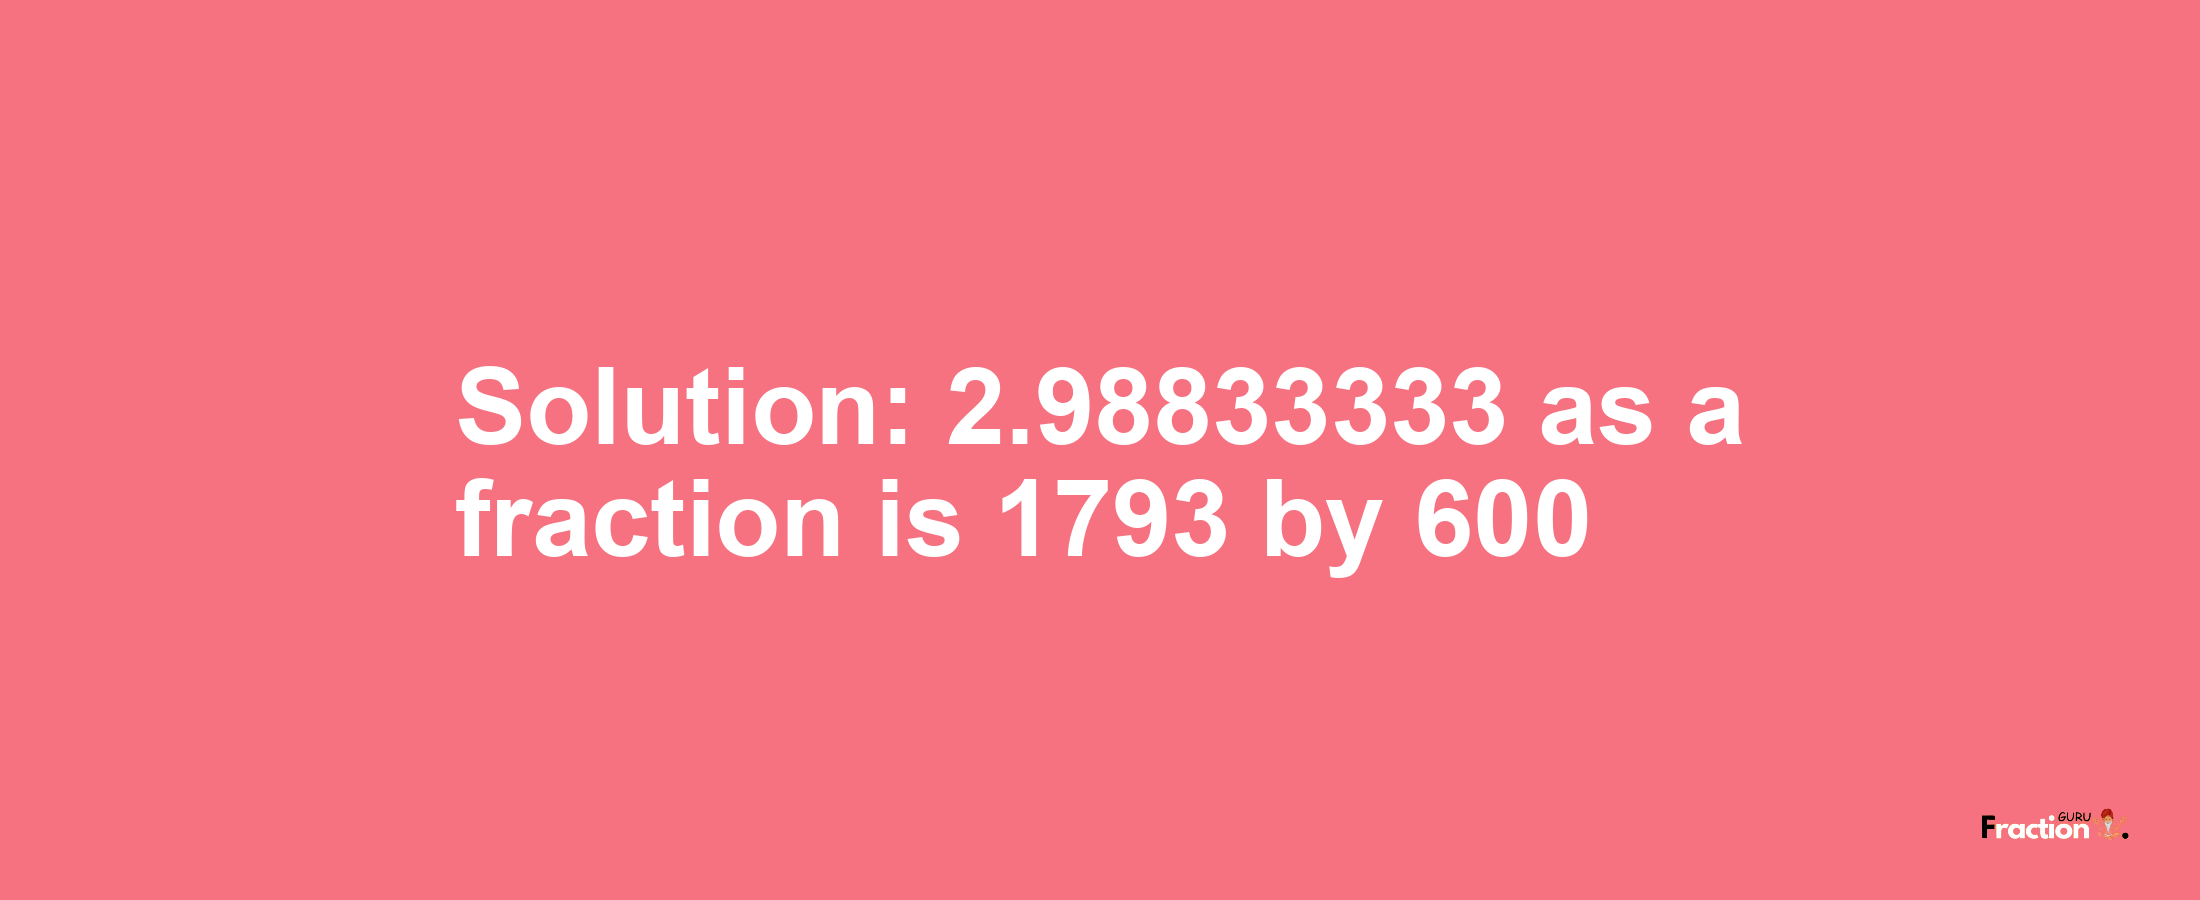 Solution:2.98833333 as a fraction is 1793/600